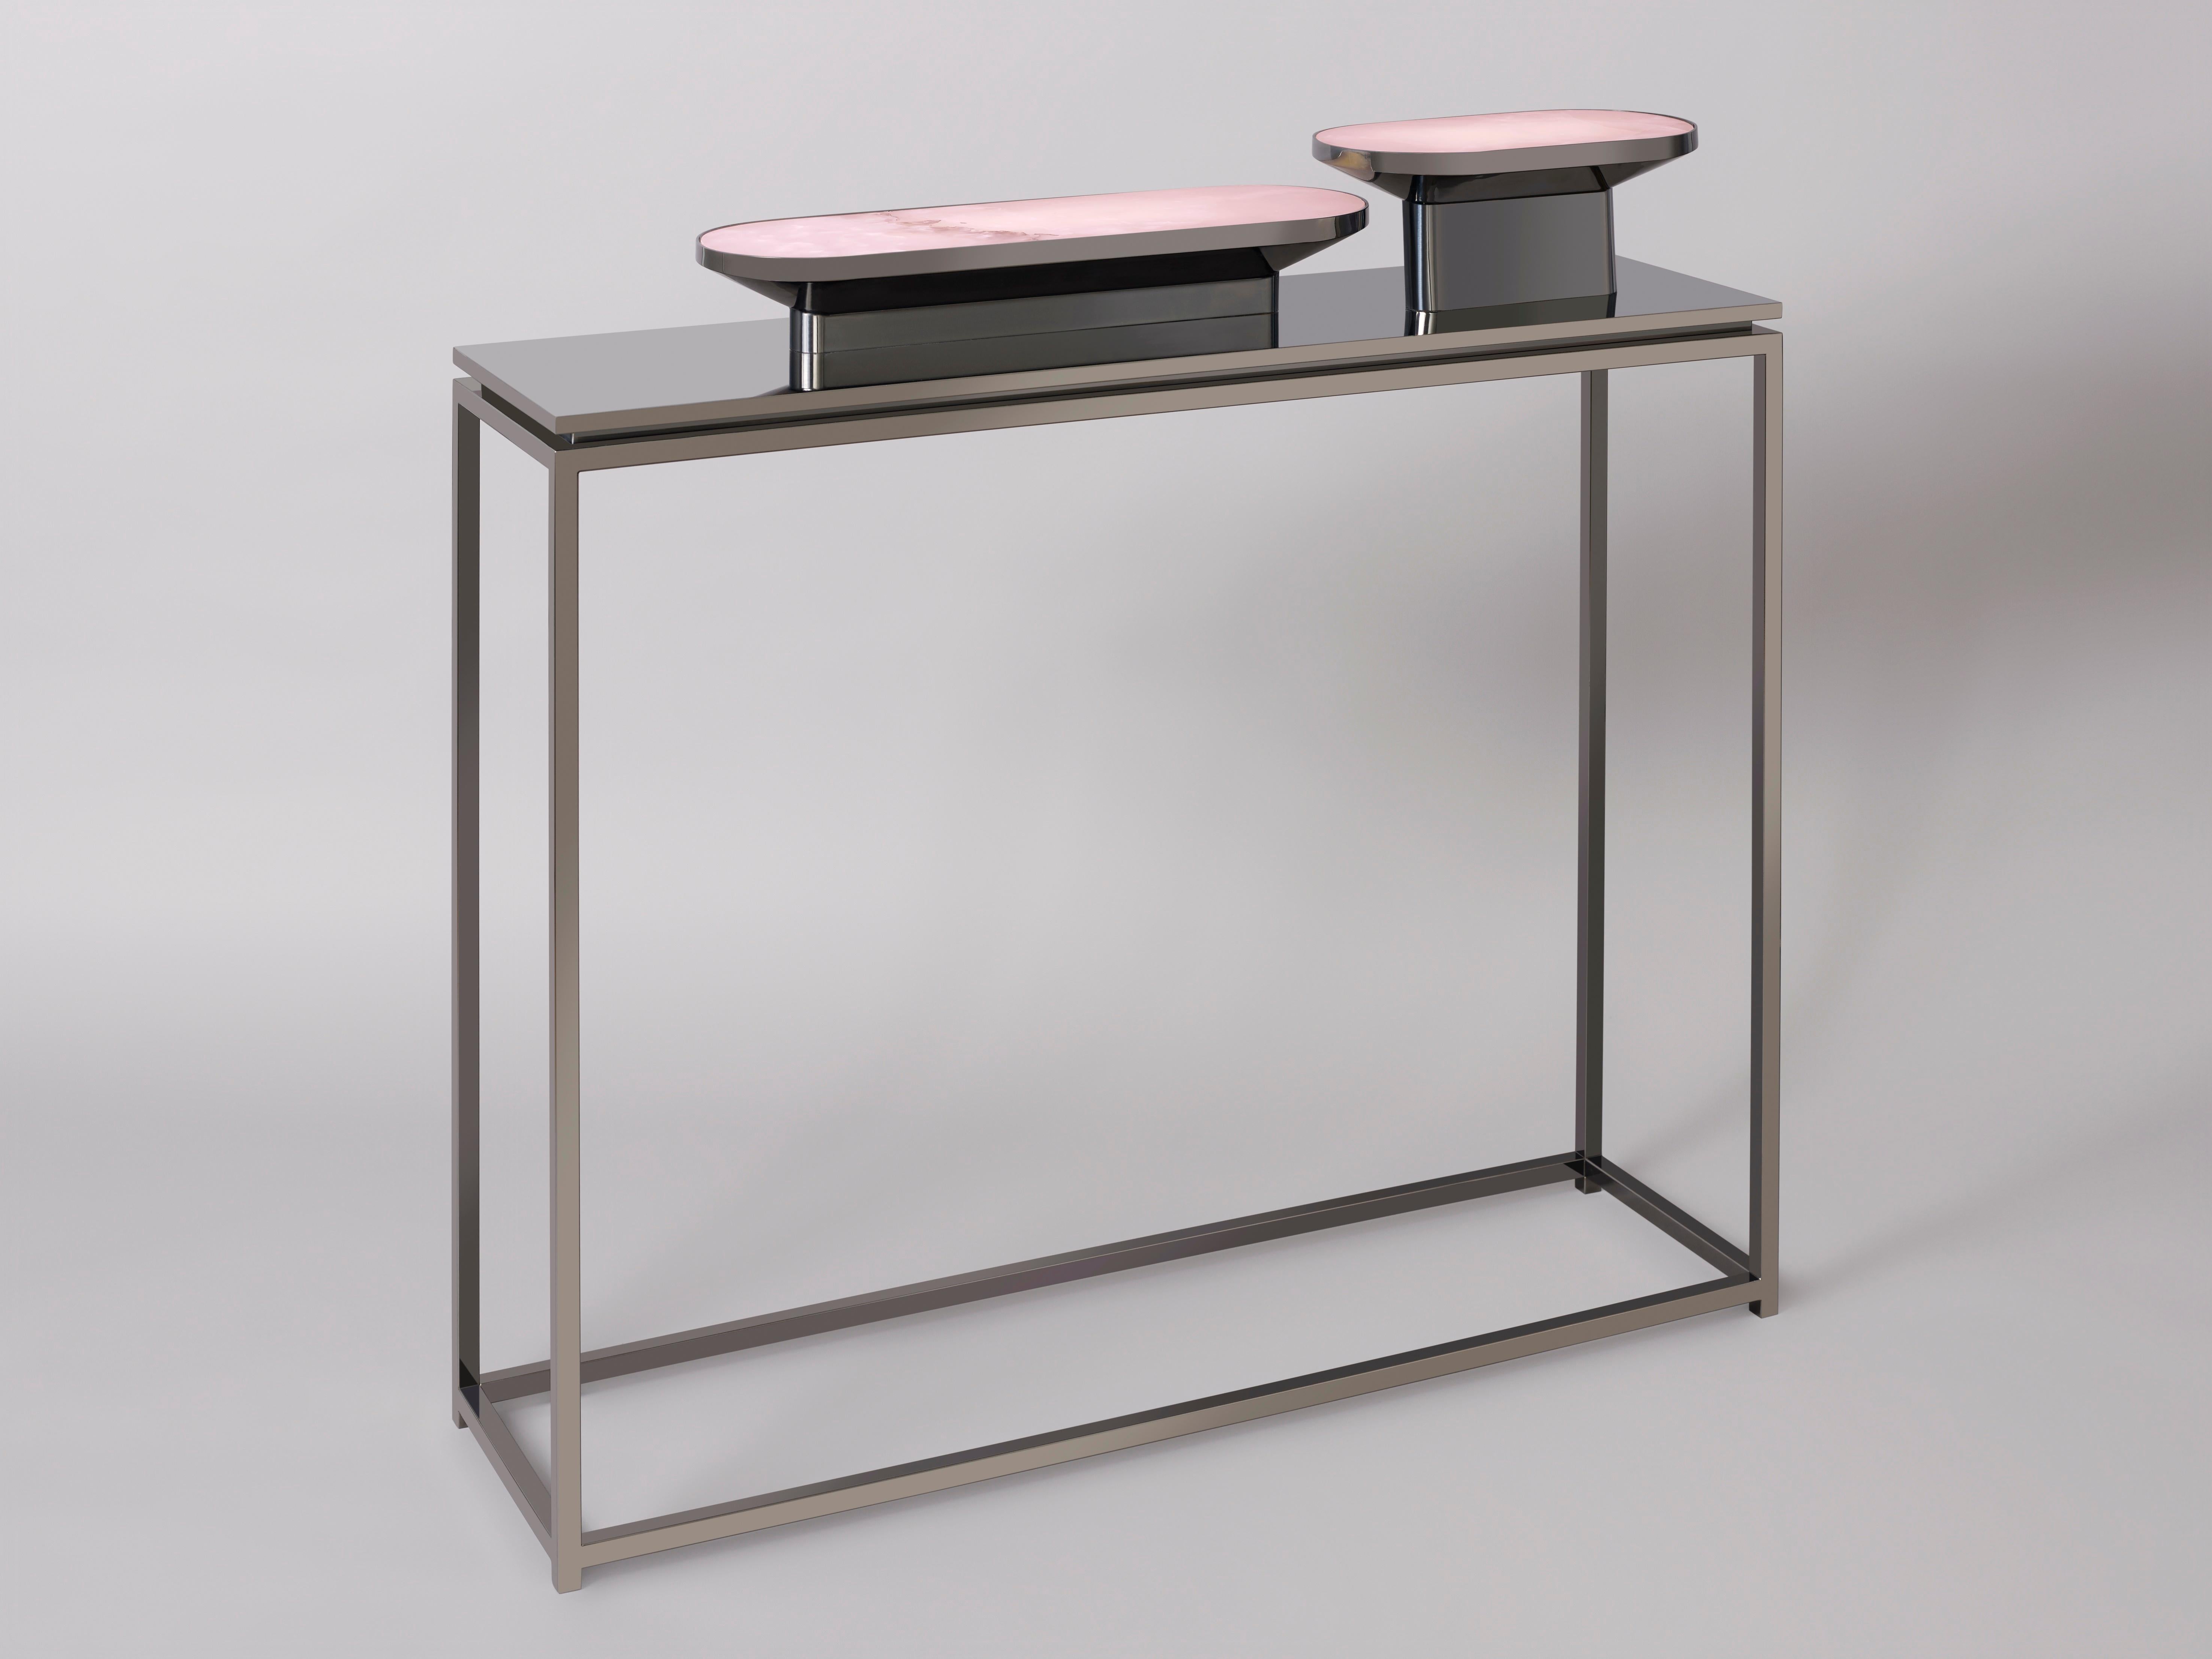 This 'JinShi Pink Jade' glamorous console by acclaimed design duo Studio MVW is a true jewel for the home. The mirror encompasses two retro-lit heads in natural pink jade, an exceptional gemstone with a sumptuous powder transparency, and a structure